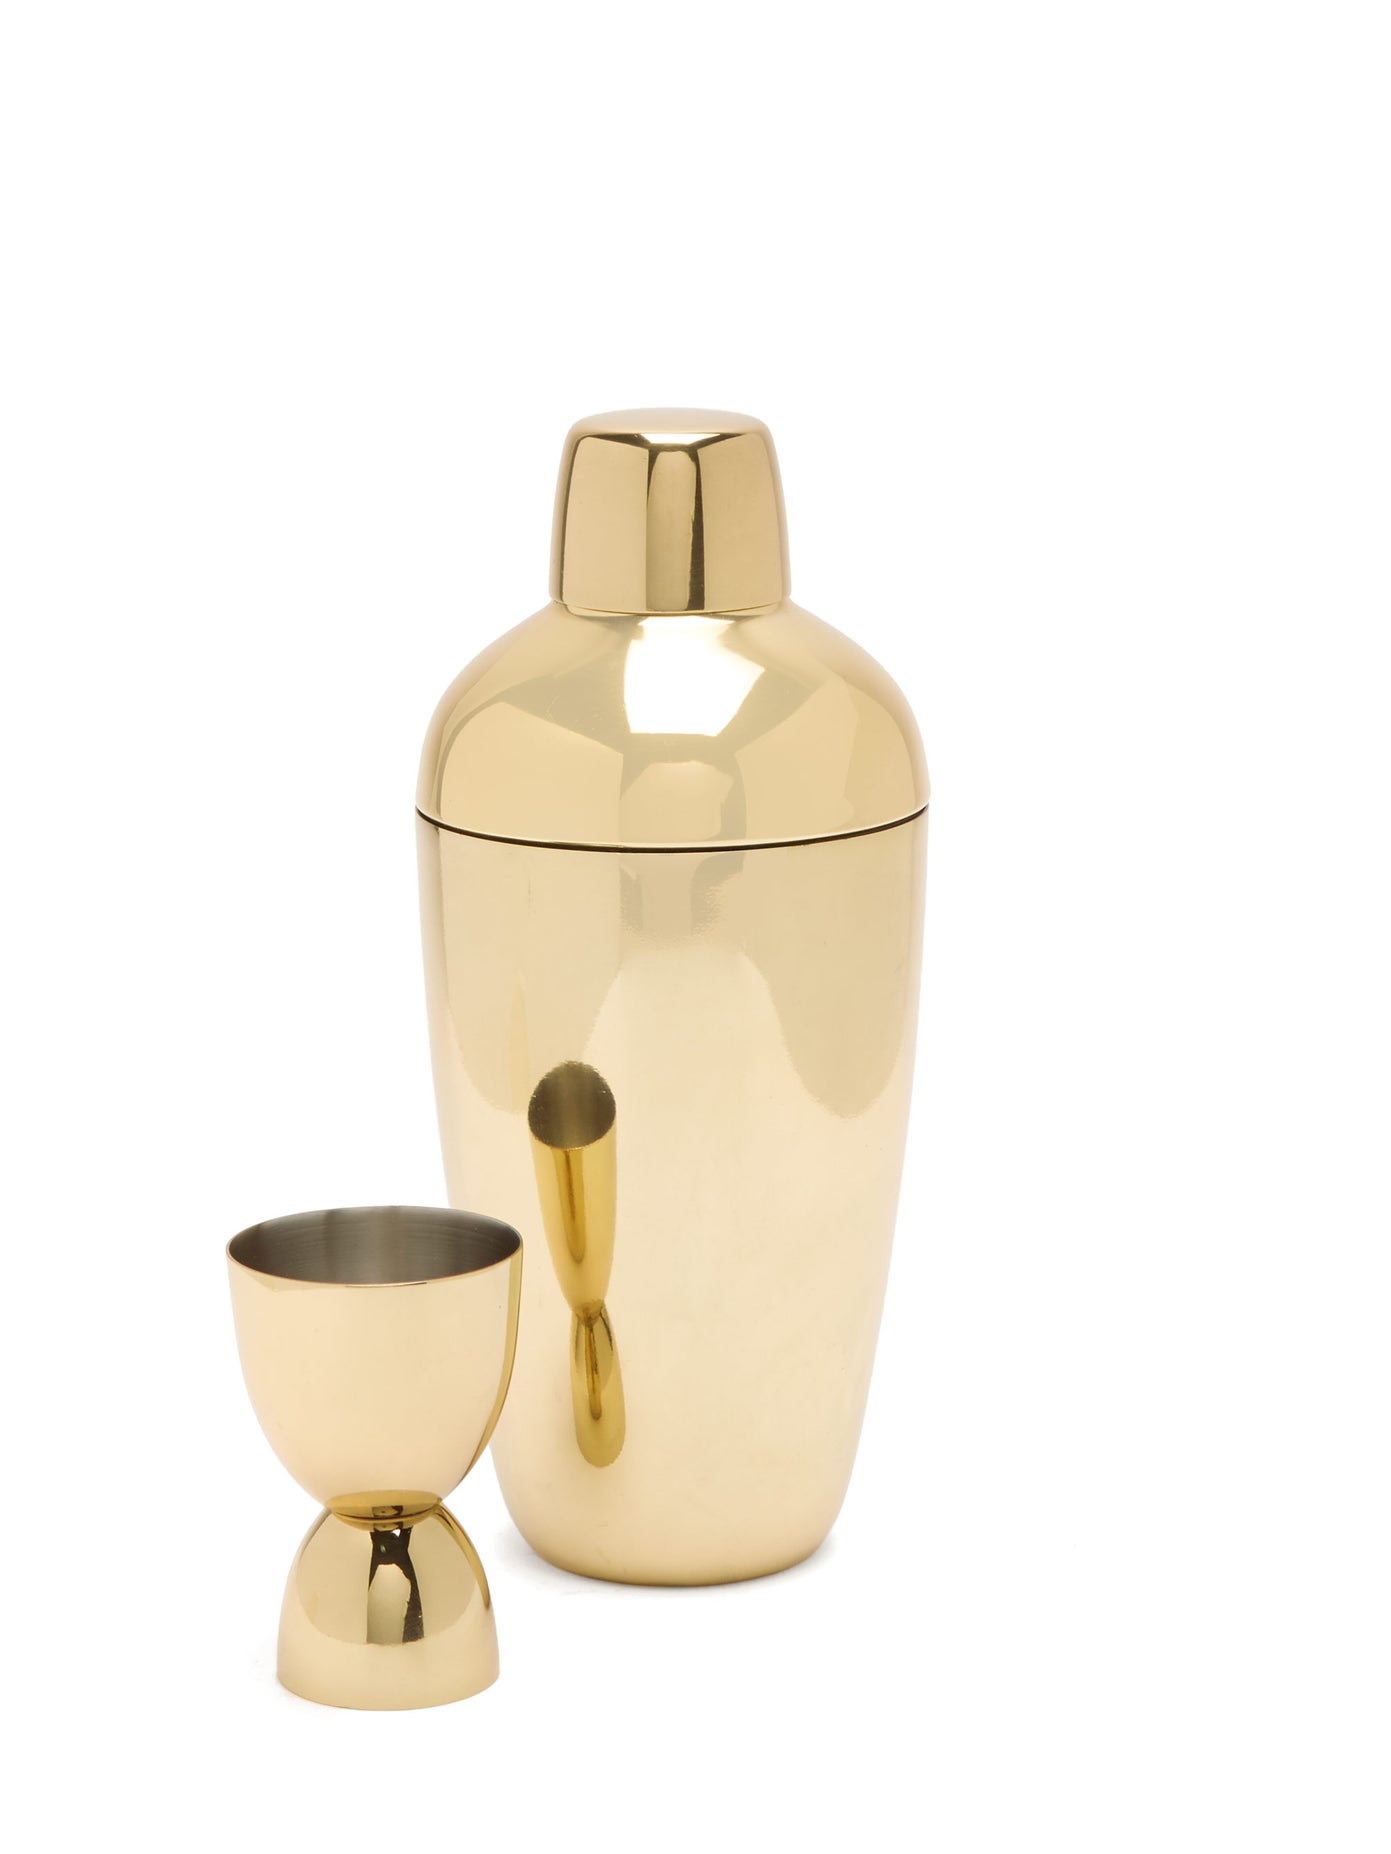 Reader's Request: Chic Room Décor Recommendations (Especially Gold)